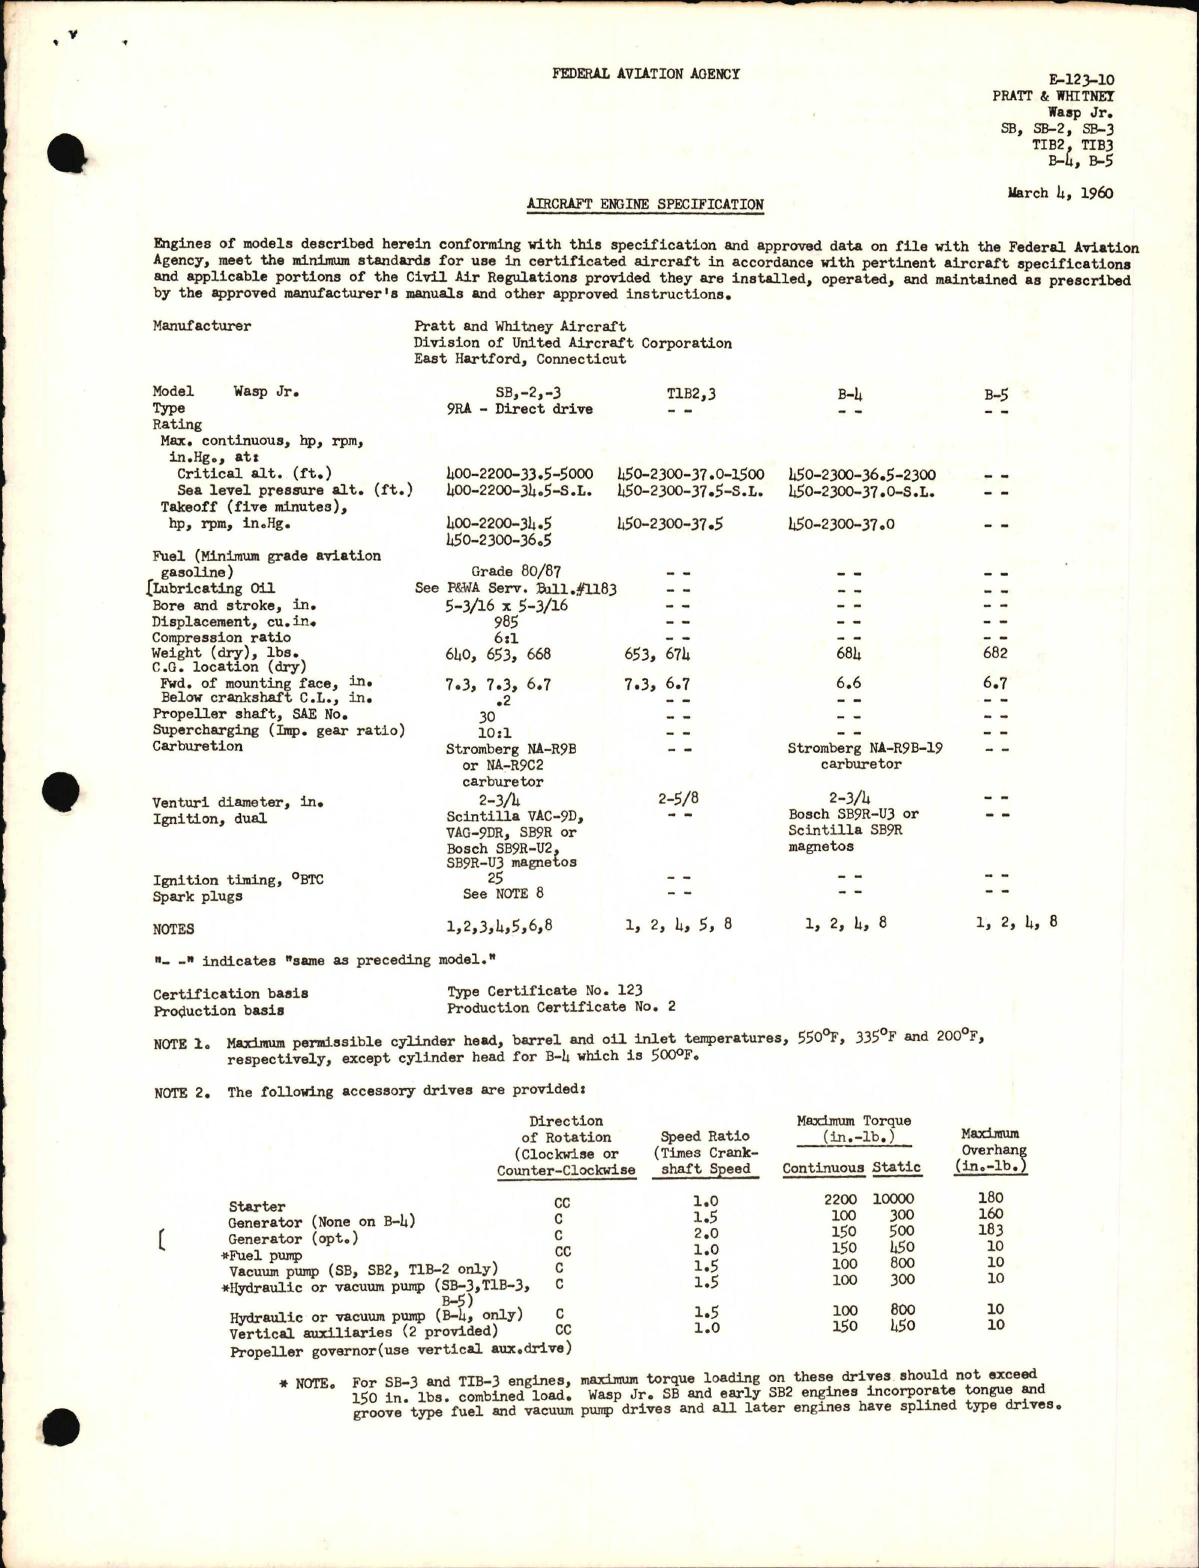 Sample page 1 from AirCorps Library document: SB, T1B, B-4, B-5 Wasp Jr